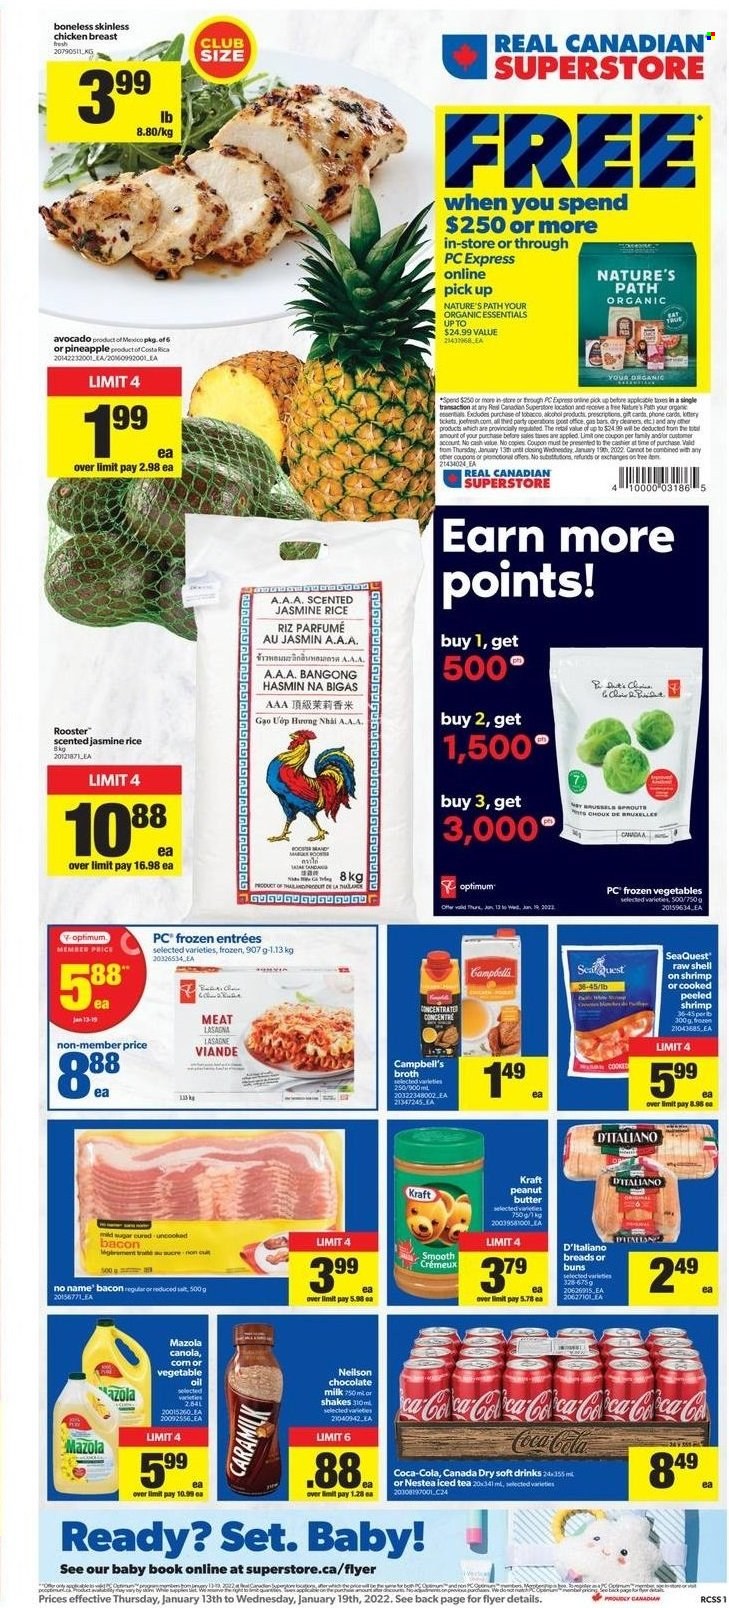 thumbnail - Real Canadian Superstore Flyer - January 13, 2022 - January 19, 2022 - Sales products - buns, avocado, No Name, Campbell's, lasagna meal, Kraft®, bacon, milk, shake, frozen vegetables, milk chocolate, chocolate, broth, rice, jasmine rice, oil, peanut butter, Canada Dry, Coca-Cola, ice tea, soft drink, alcohol, chicken breasts, chicken, book, Optimum. Page 1.